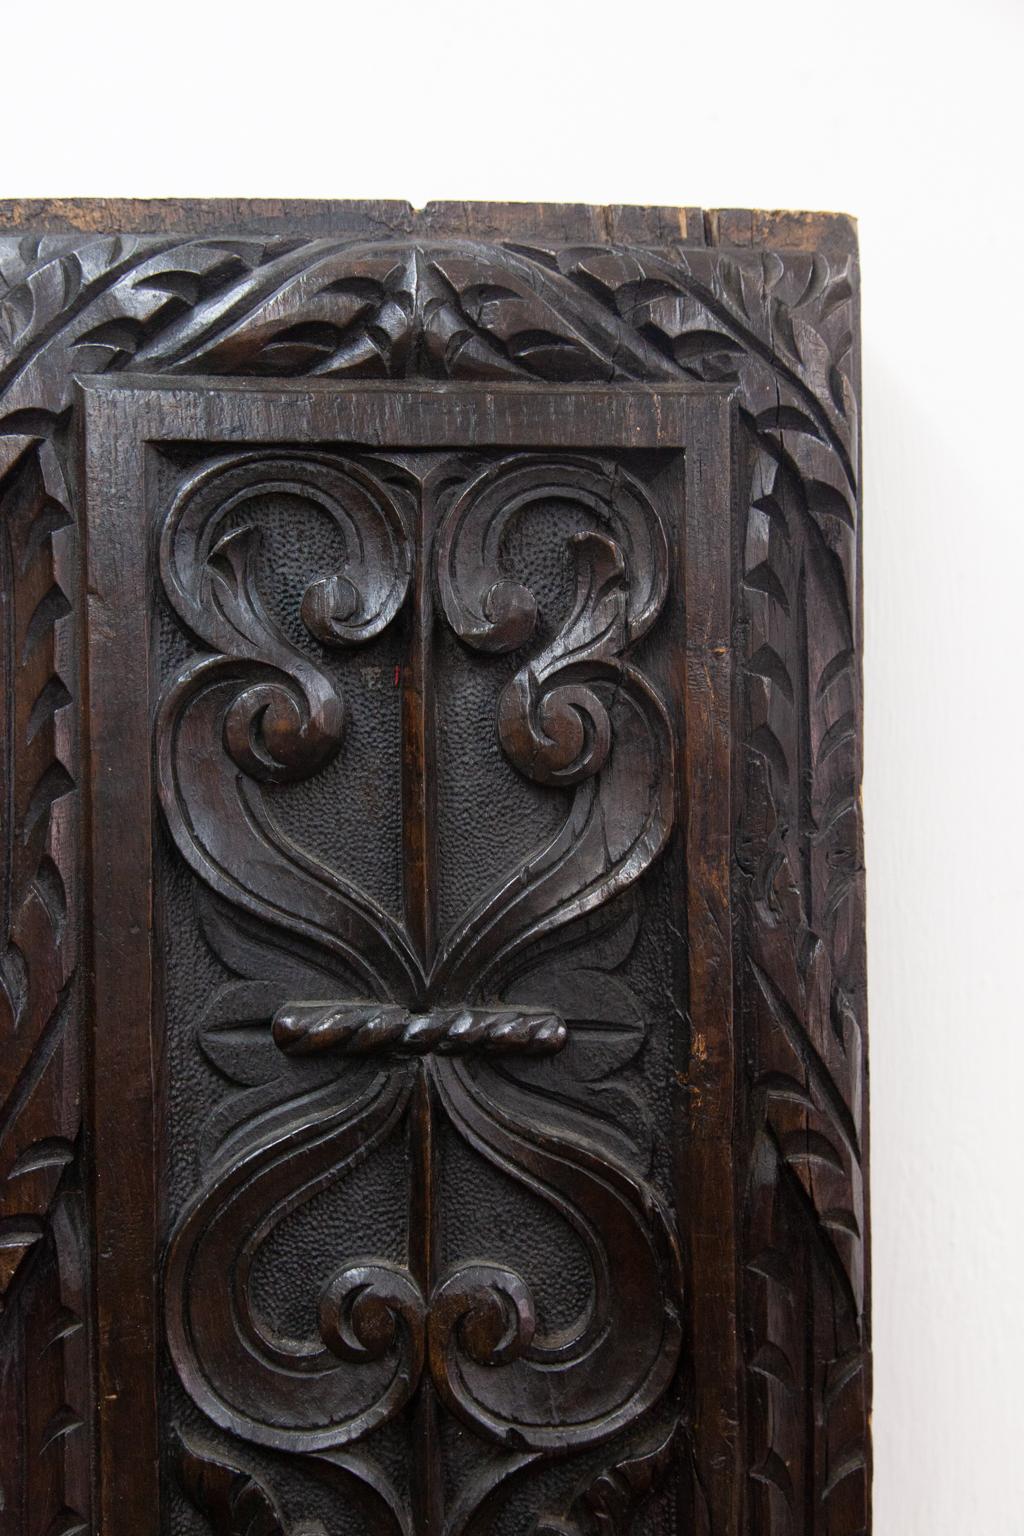 Pair of carved oak panels, will lend an architectural accent to an area. They are carved with linen fold motifs on the lower section. Each has high relief arabesques with stipled background carved in the top portion. They have turned quarter columns